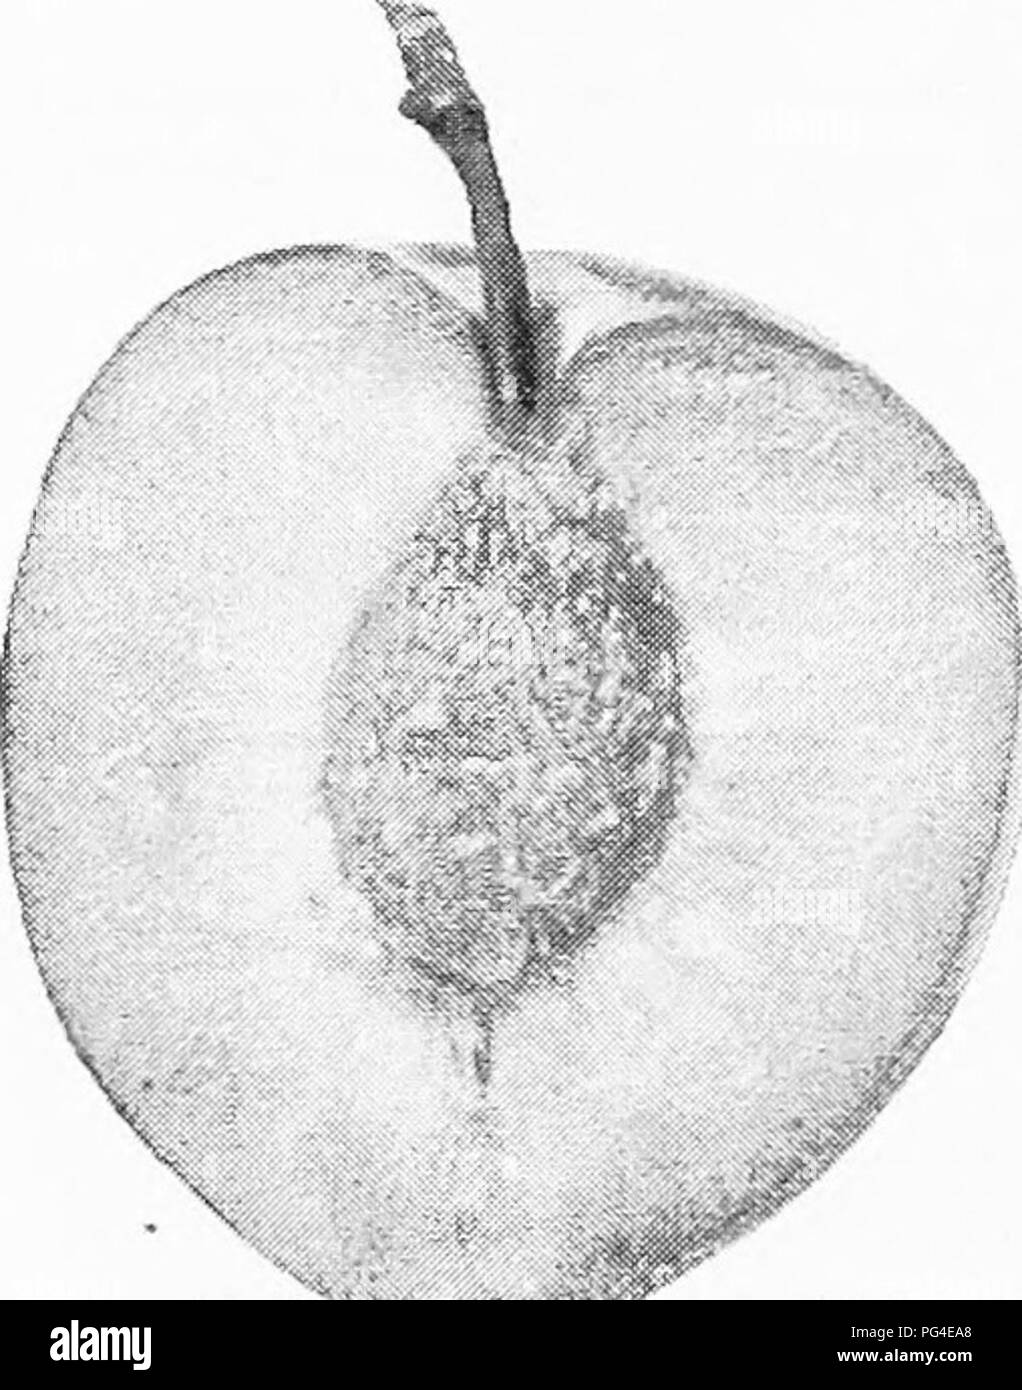 . The fruits of Ontario. Fruit-culture. 172 REPORT ON THE No. 2i CHABOT {Yelloiv Japan, Bailey.) This is the best Japan plum of its season, which is about two weeks later than Burbank. Origin: imported from Japan by Mr. Chabot, of Berkeley, Cal., and introduced to the trade by Mr. Luther Burbank in the year 1896. Tree : very vigorous, head fine, large, symmetrical ; productive ; an early bearer. Fruit ; medium to large for a Japan plum ; form oblong-conical, almost heart shaped ; color red, with pinkish bloom and numerous minute yellowish specks ; stem three-quarters of an inch long, stout; ap Stock Photo